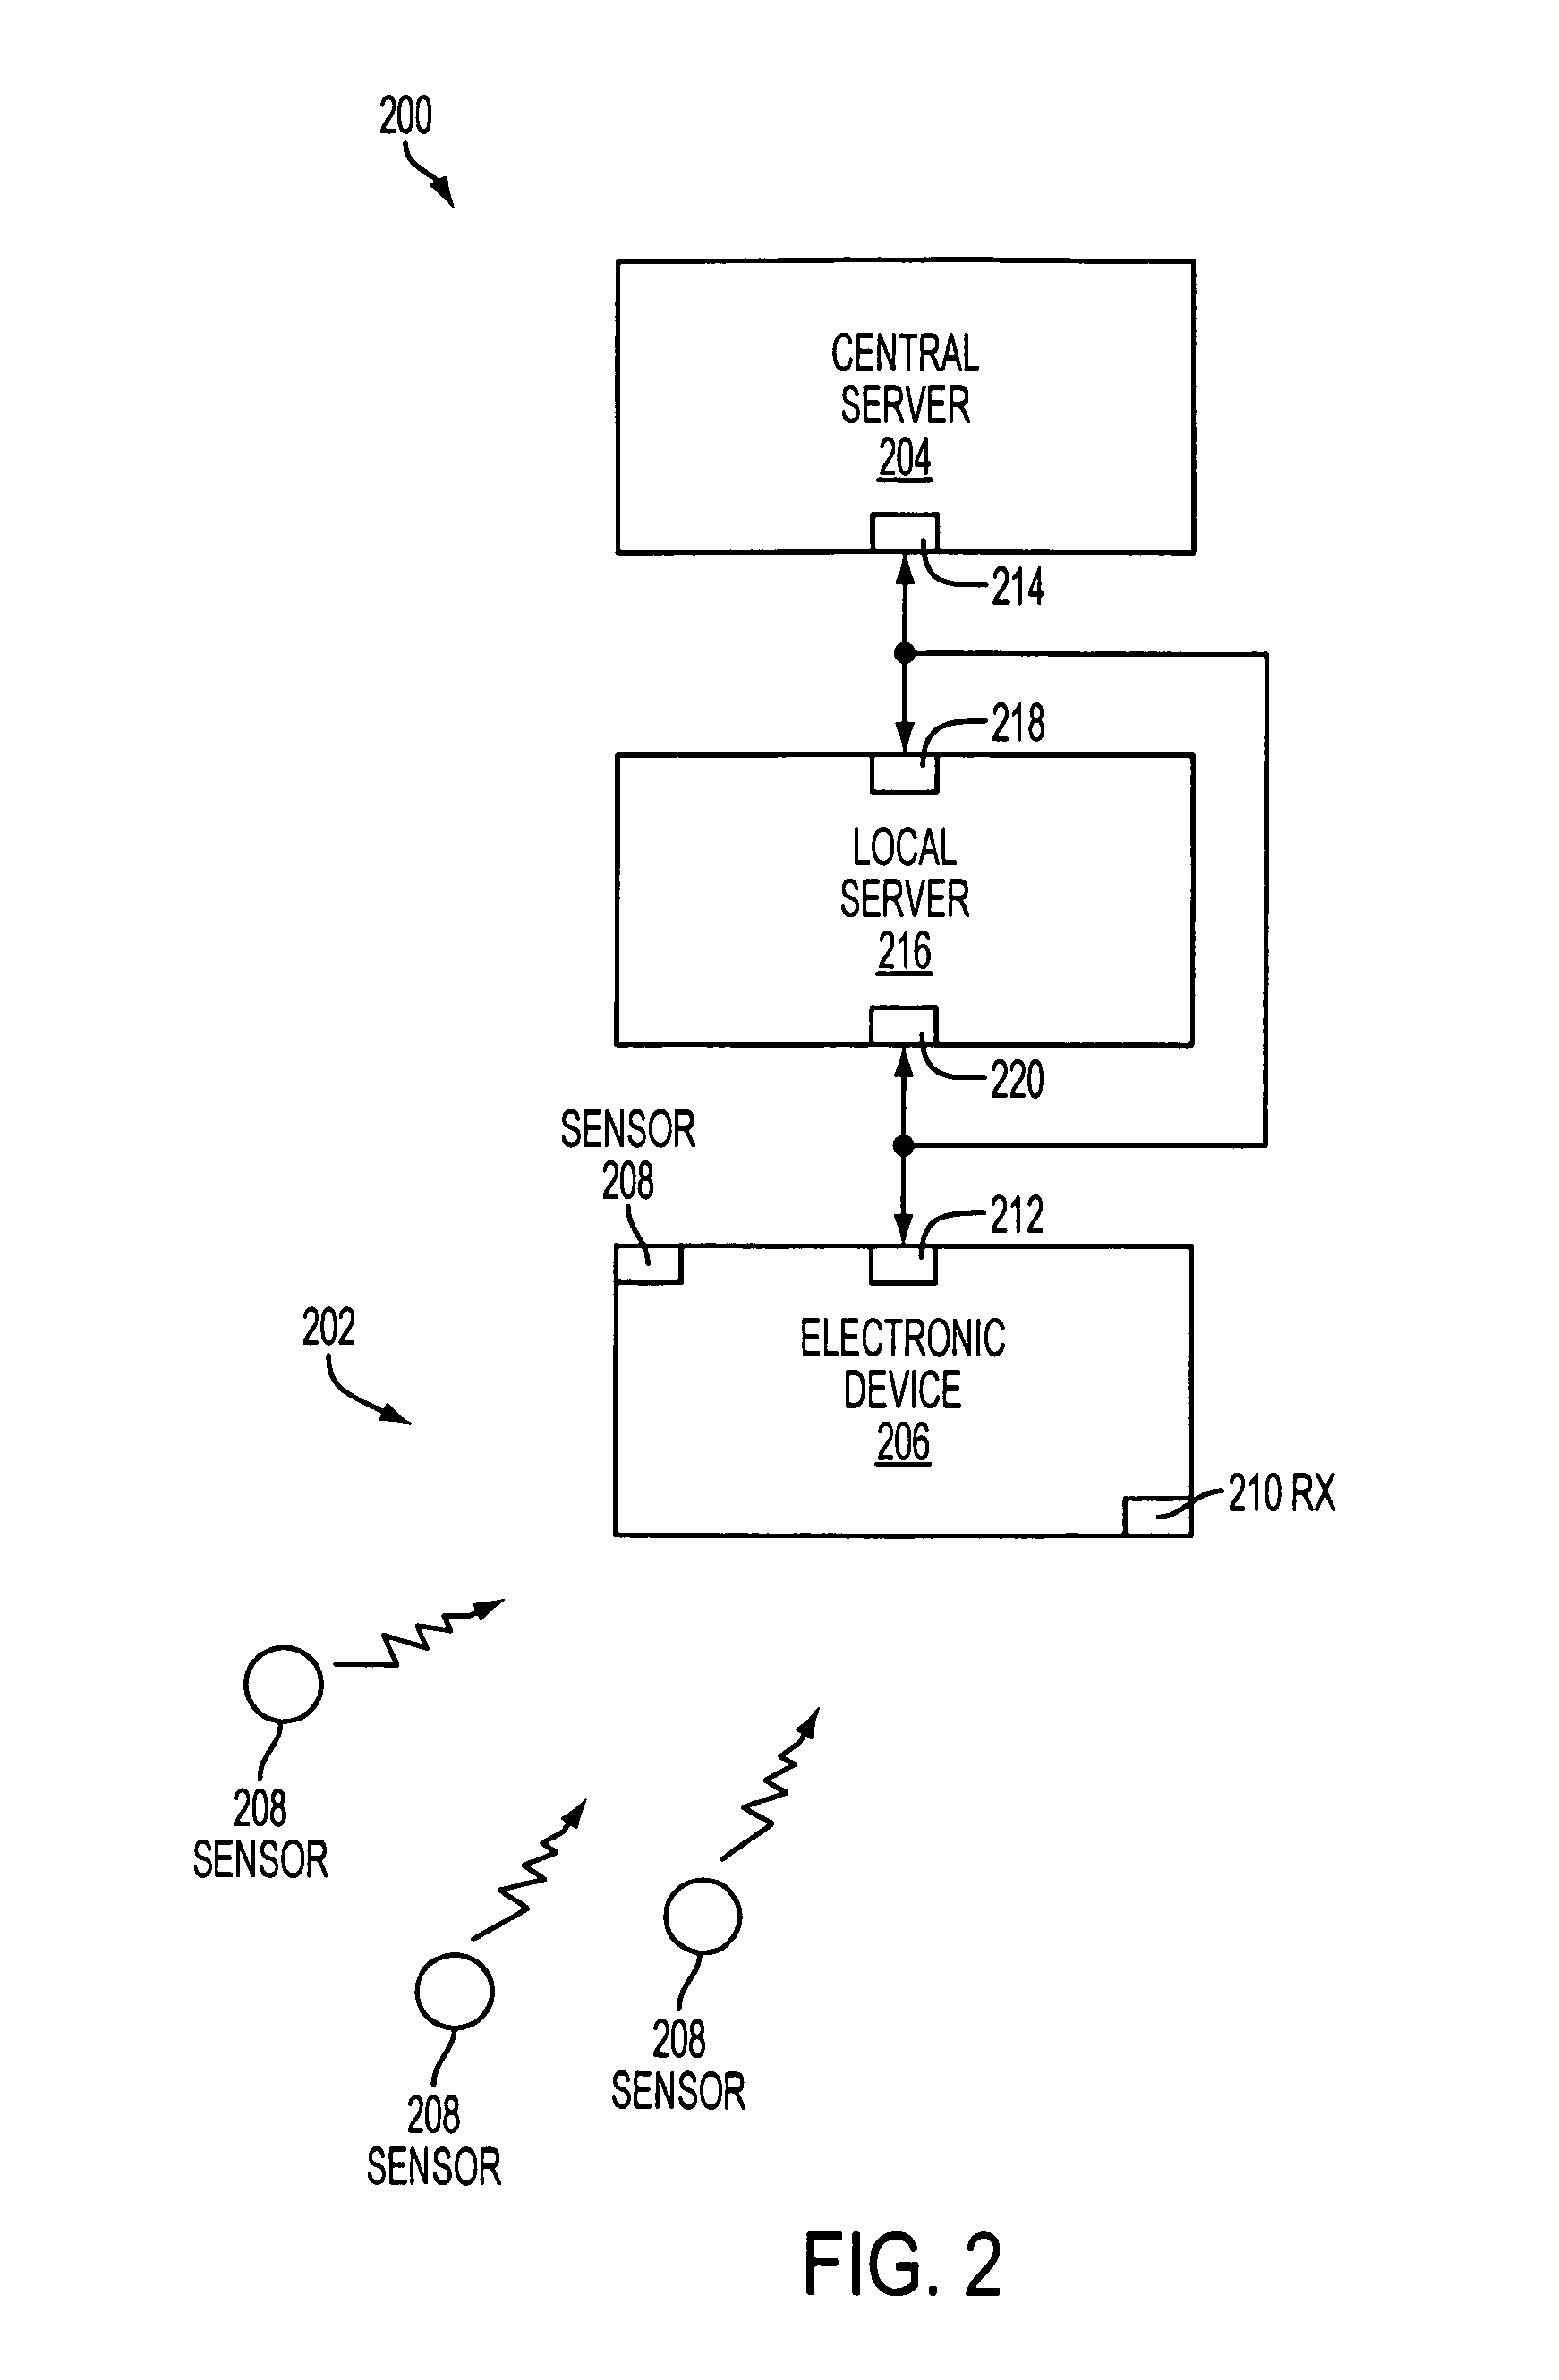 Systems and methods for providing audio and visual cues via a portable electronic device